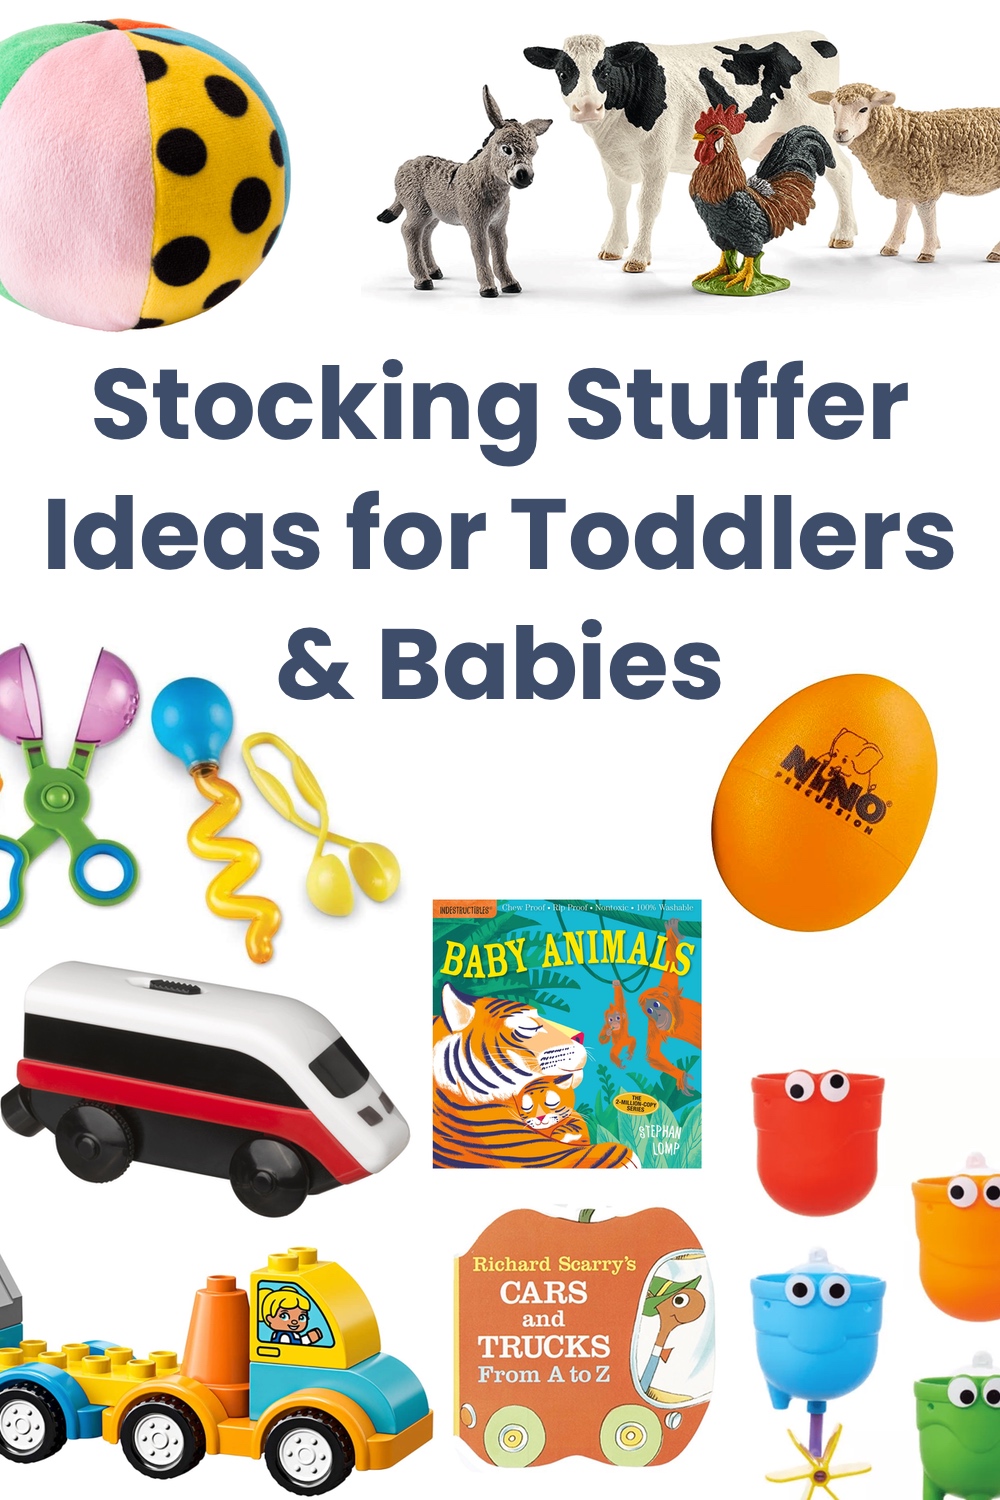 Favorite Stocking Stuffers for Toddlers & Preschoolers - The Littles & Me